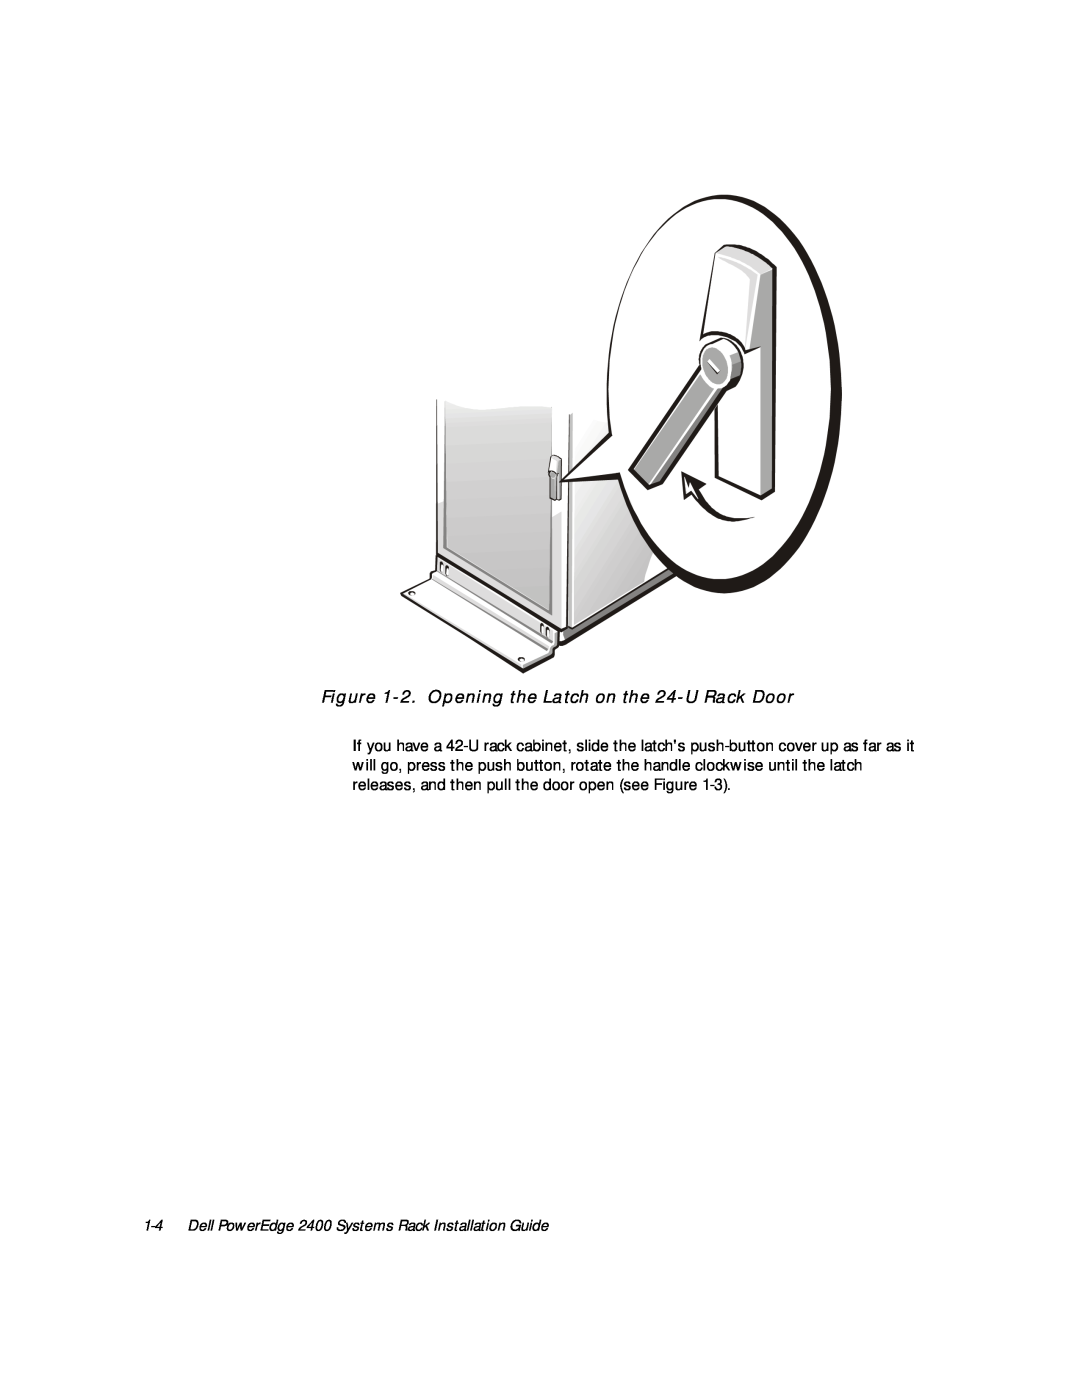 Dell 2400 manual 2.Opening the Latch on the 24-URack Door 